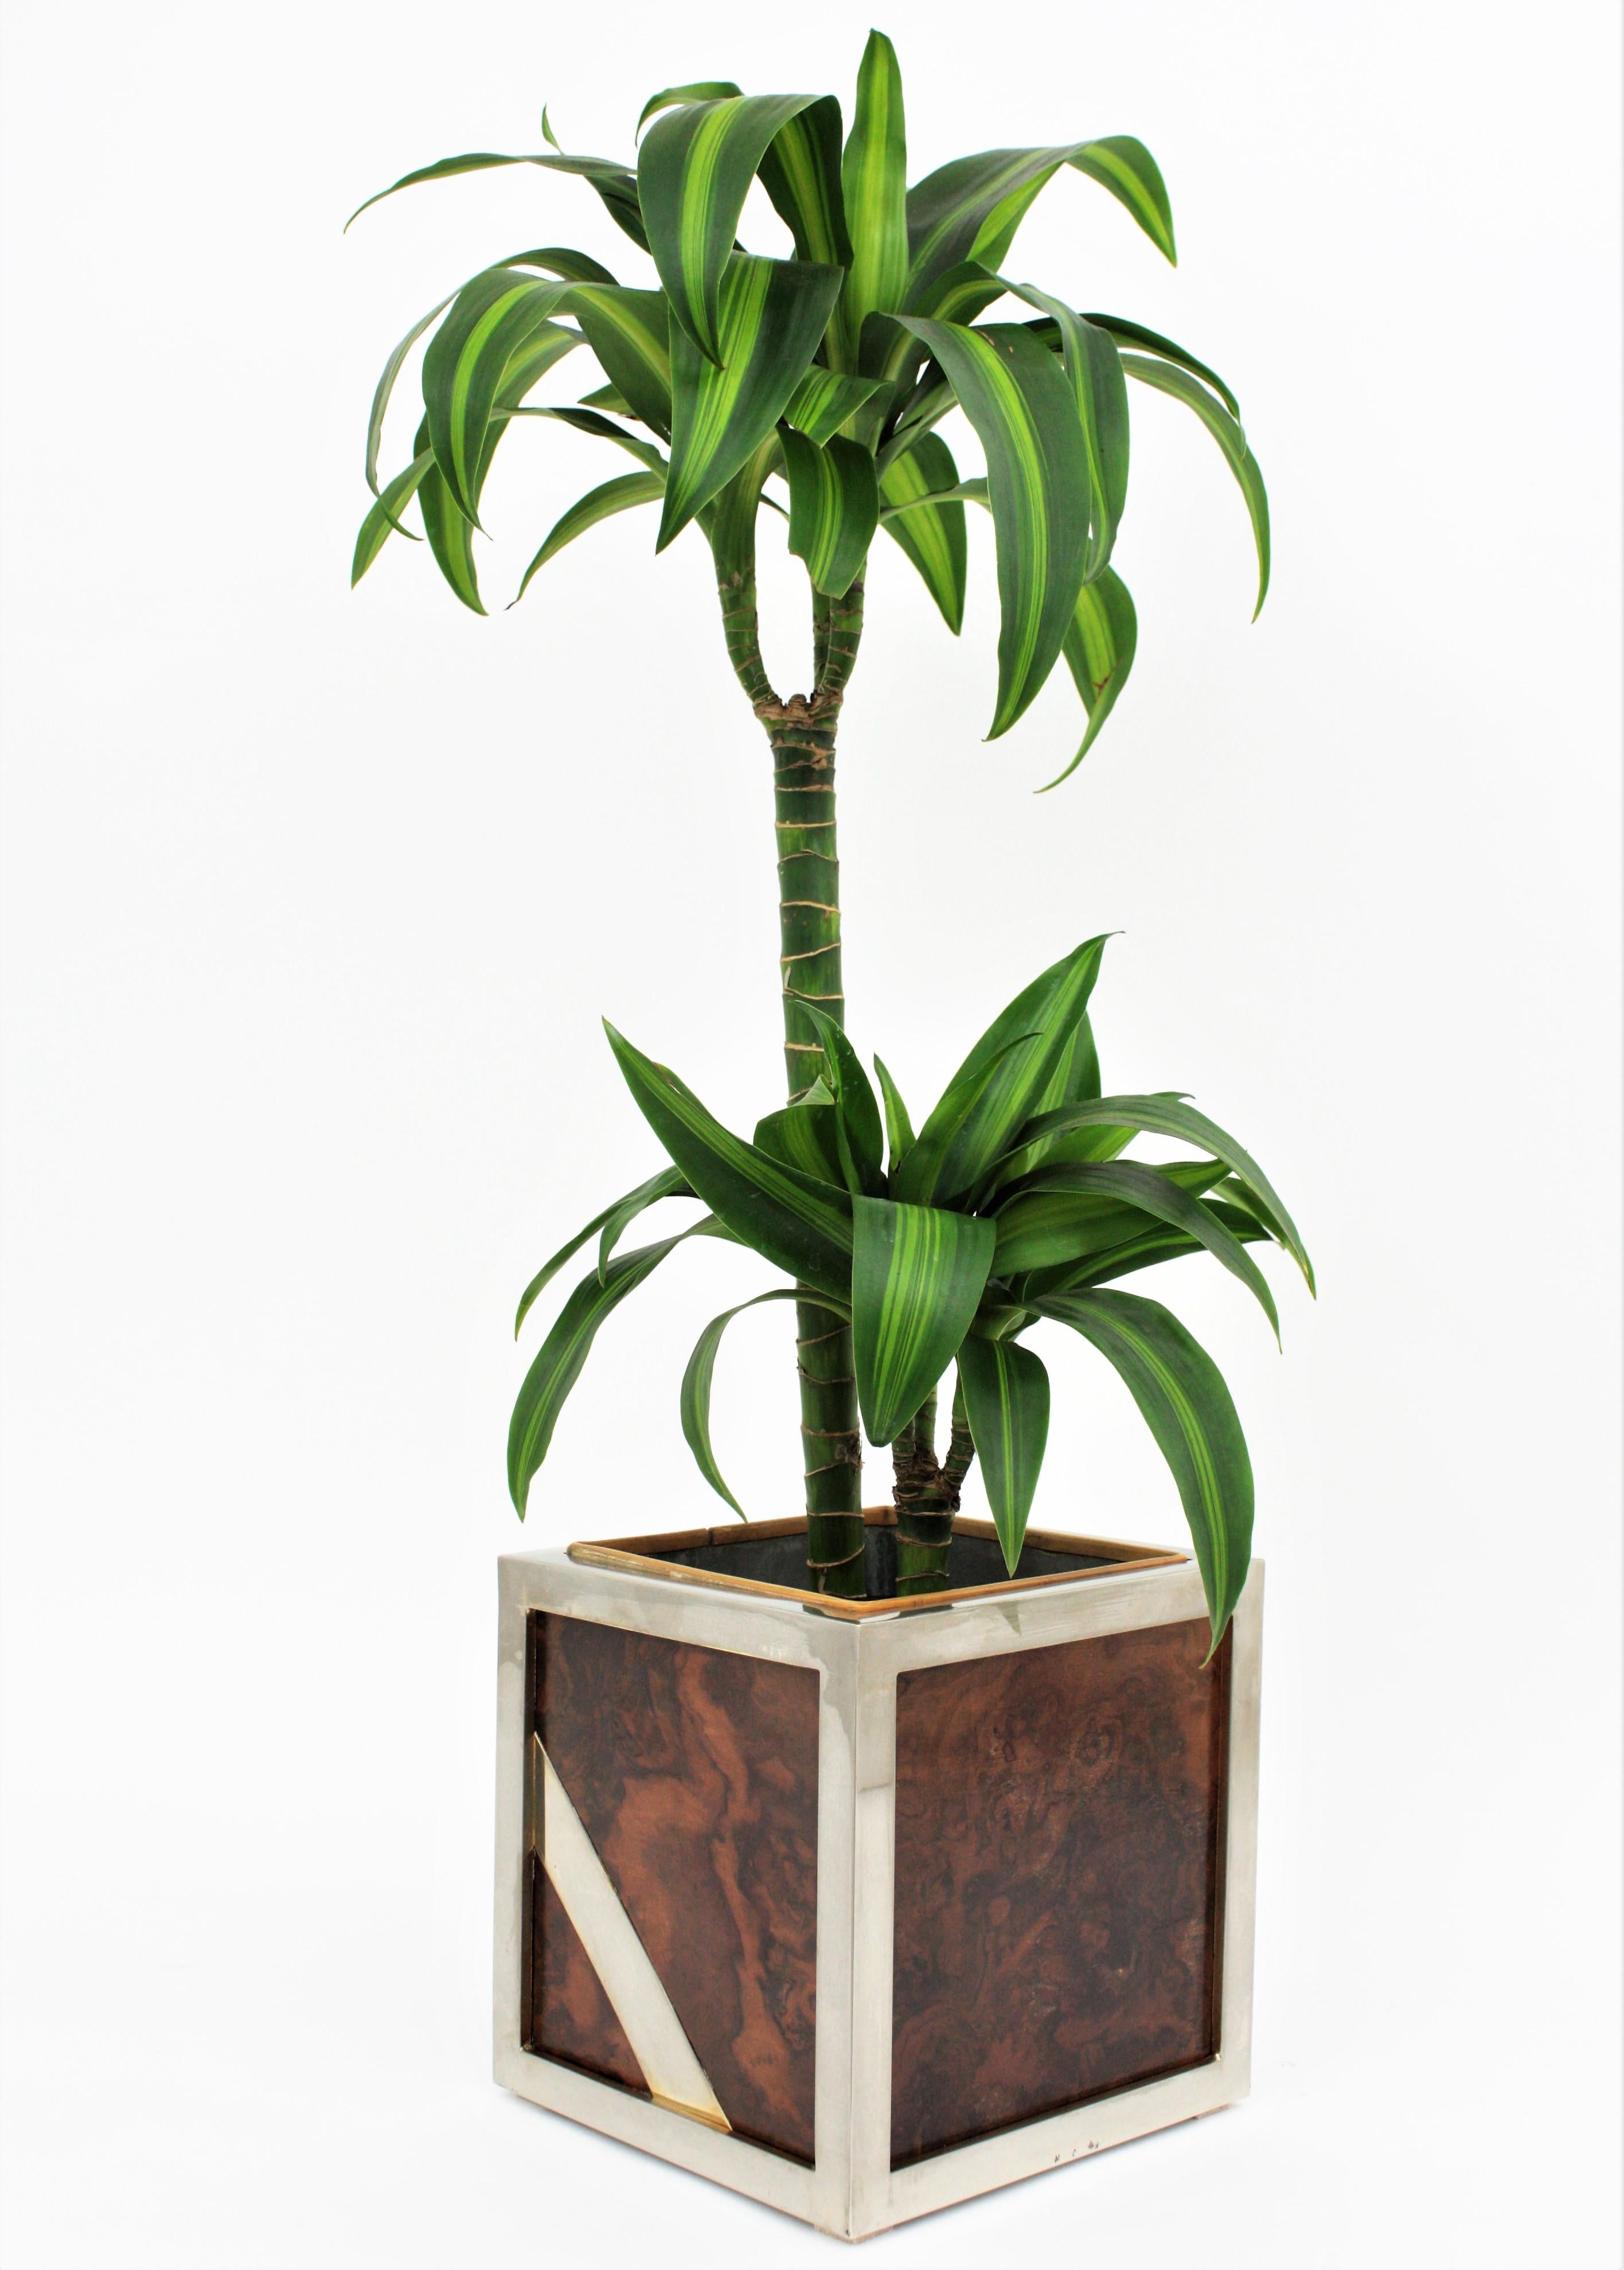 French Maison Lancel Inspired Planter in Walnut and Chromed Steel, 1970s For Sale